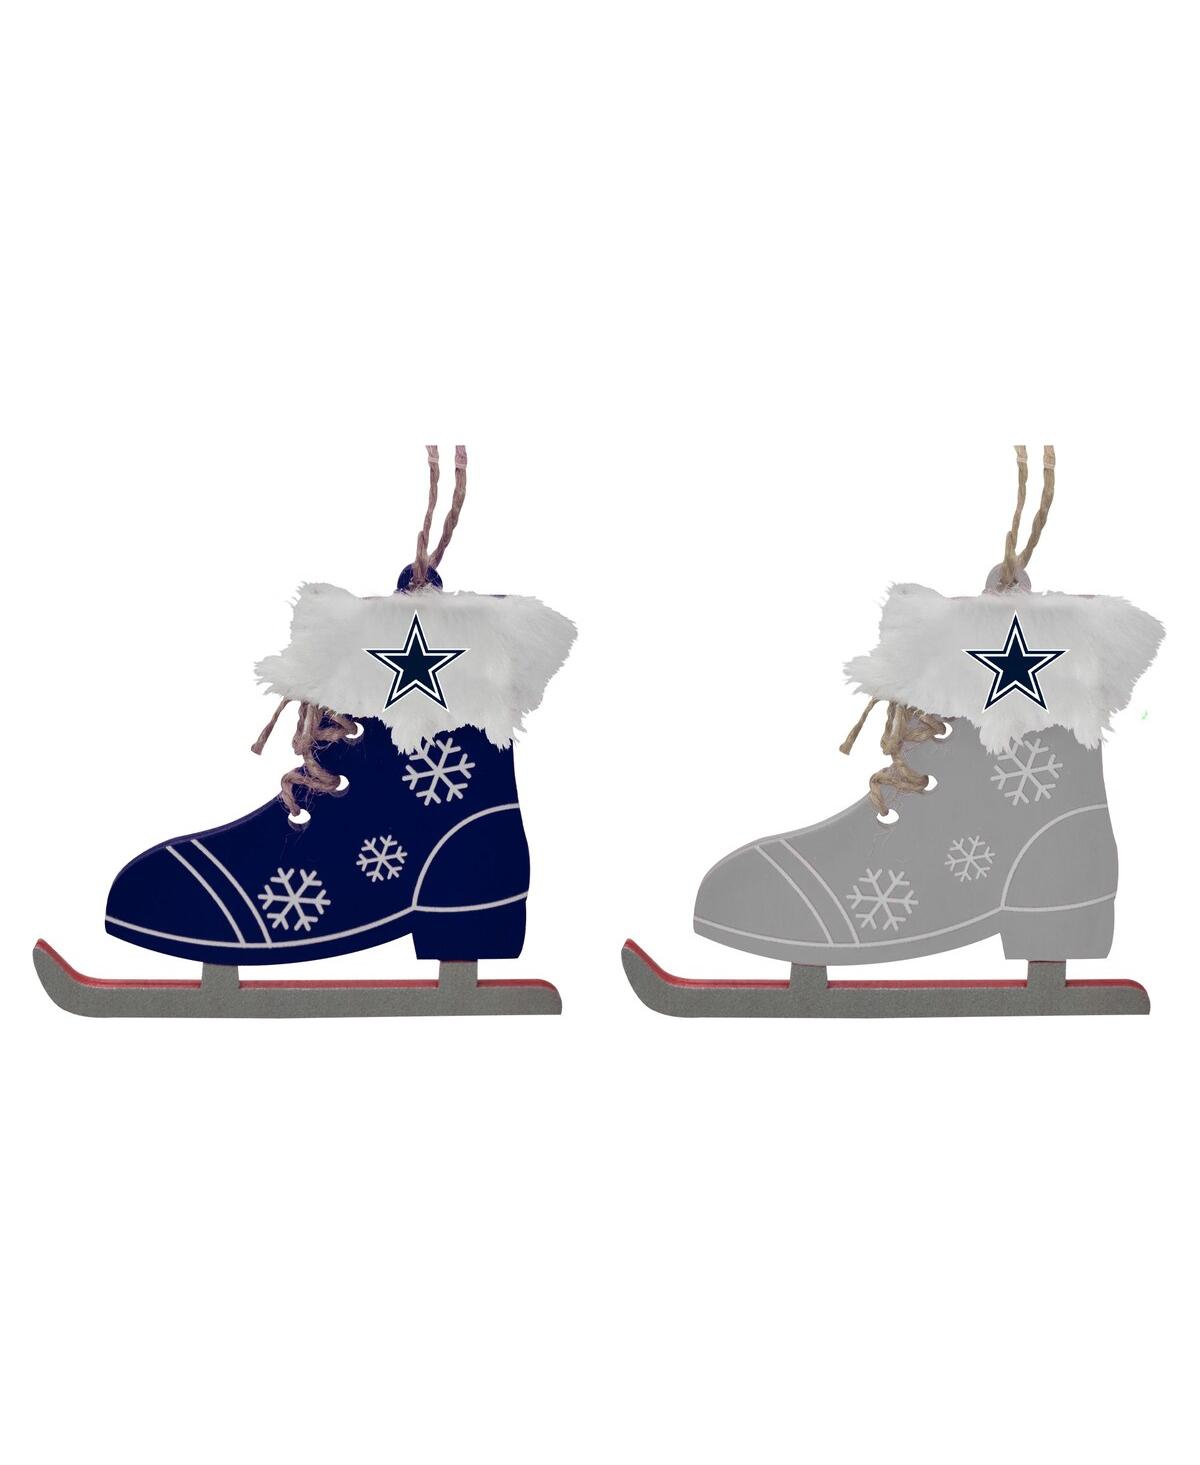 Memory Company The  Dallas Cowboys Two-pack Ice Skate Ornament Set In Blue